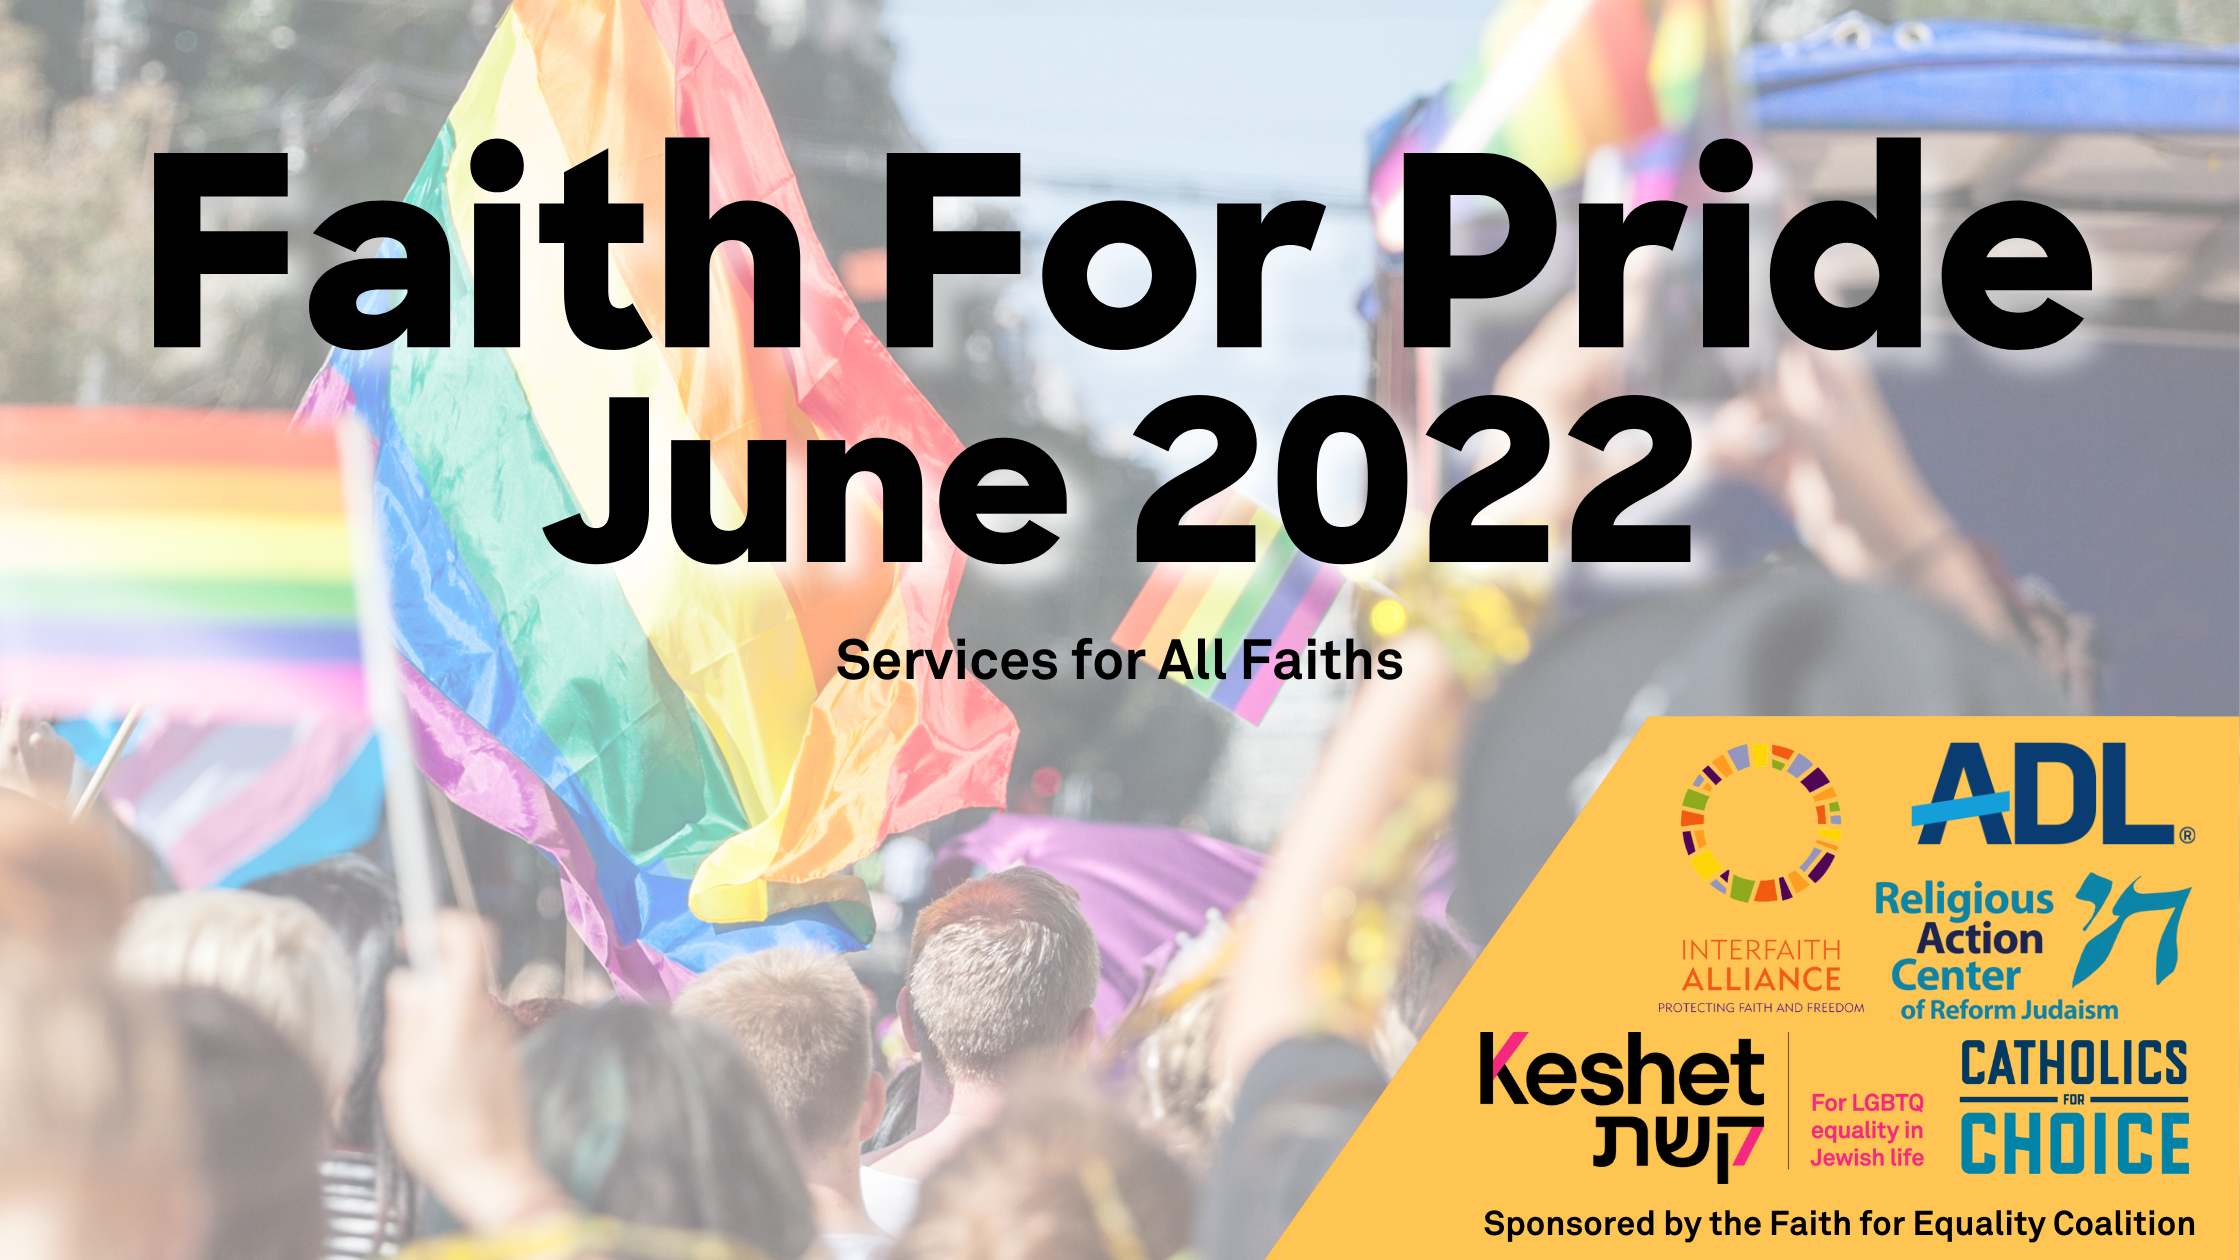 Faith for Pride, June 2022. Services for all Faiths. Background image of a Pride parade.